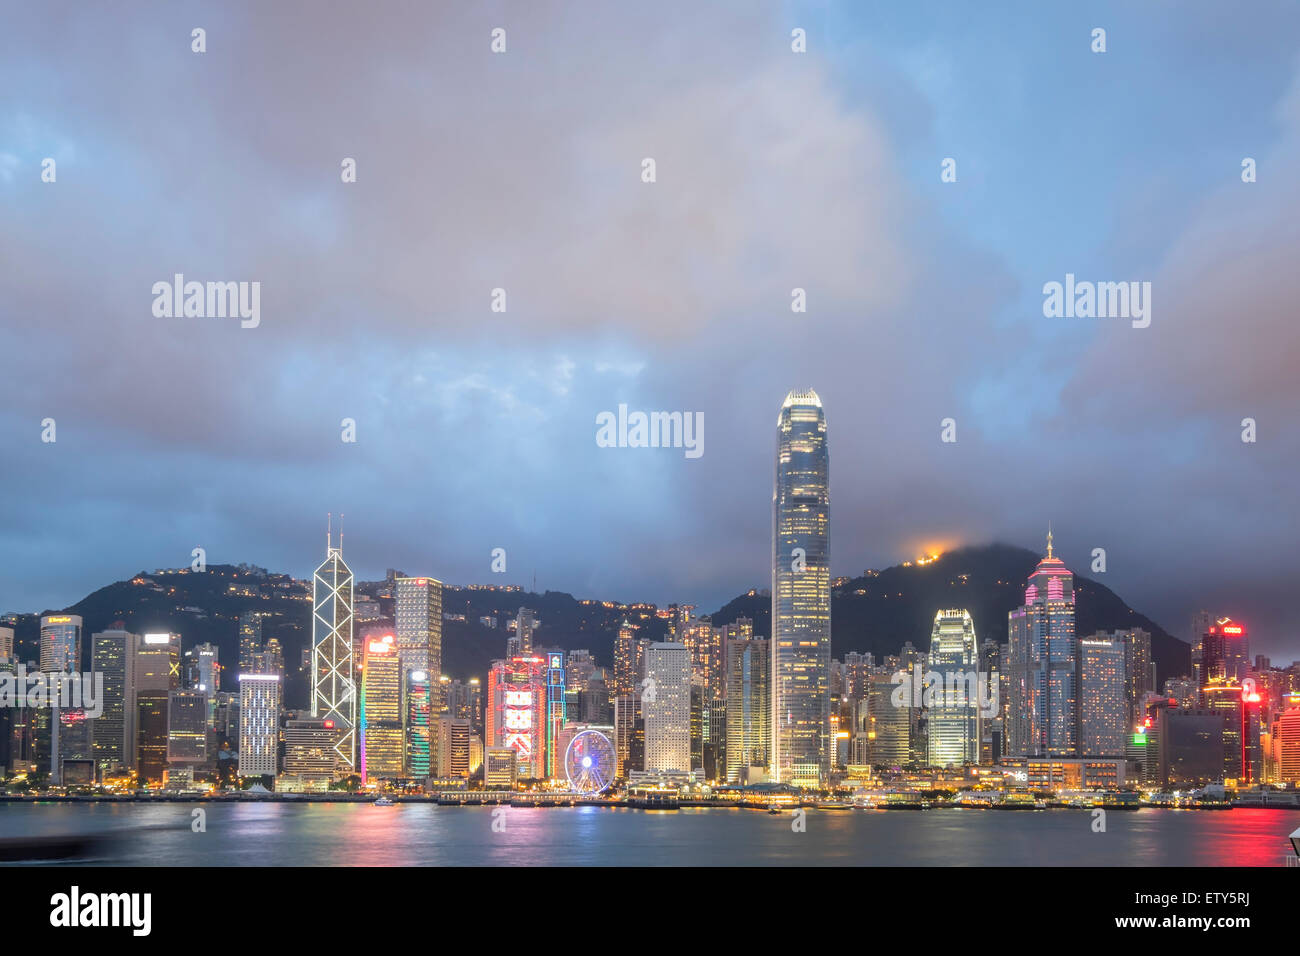 Dusk skyline of skyscrapers in Hong Kong from Kowloon on a clear day Stock Photo